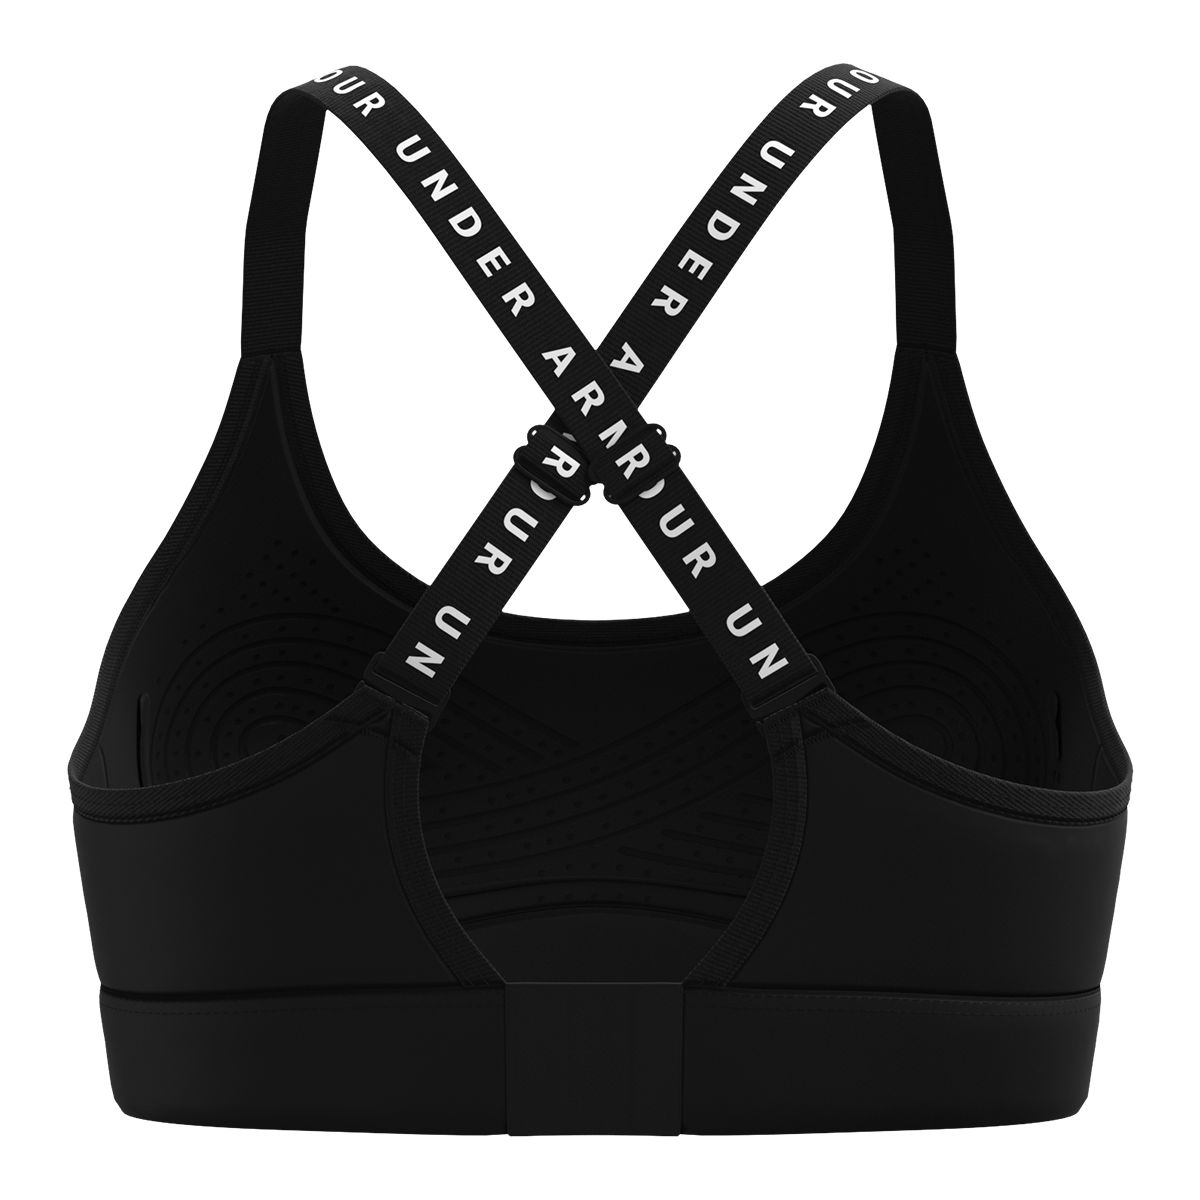 https://media-www.atmosphere.ca/product/div-03-softgoods/dpt-70-athletic-clothing/sdpt-02-womens/333479641/ua-w-infinity-covered-mid-bra-black-l--36b89b63-c1d1-40d5-9d6a-46a3c6873480-jpgrendition.jpg?imdensity=1&imwidth=1244&impolicy=mZoom